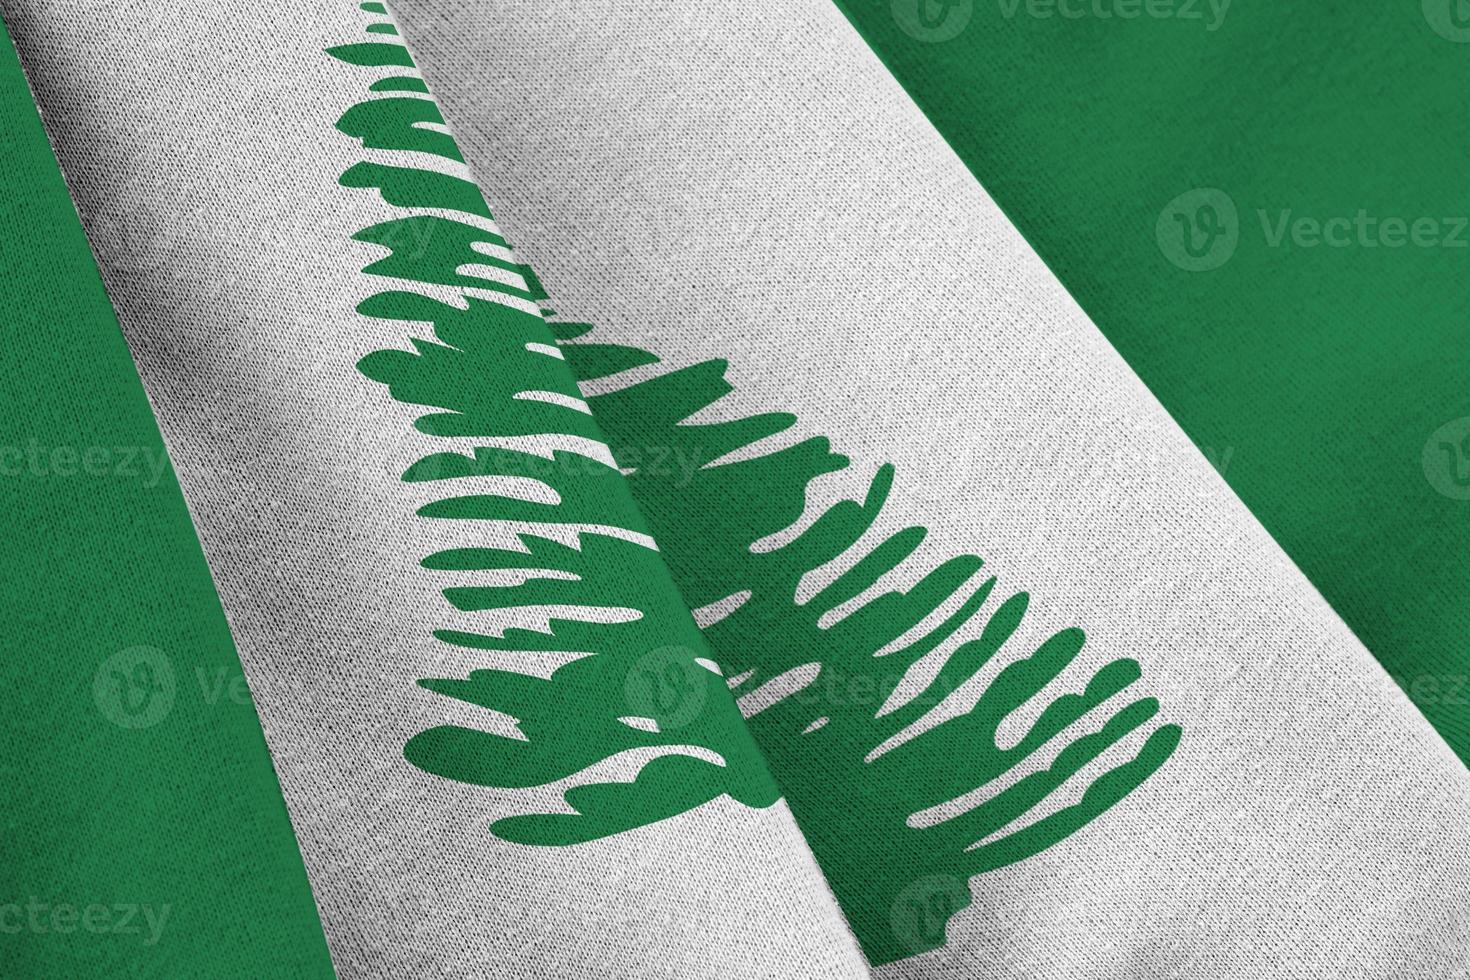 Norfolk island flag with big folds waving close up under the studio light indoors. The official symbols and colors in banner photo